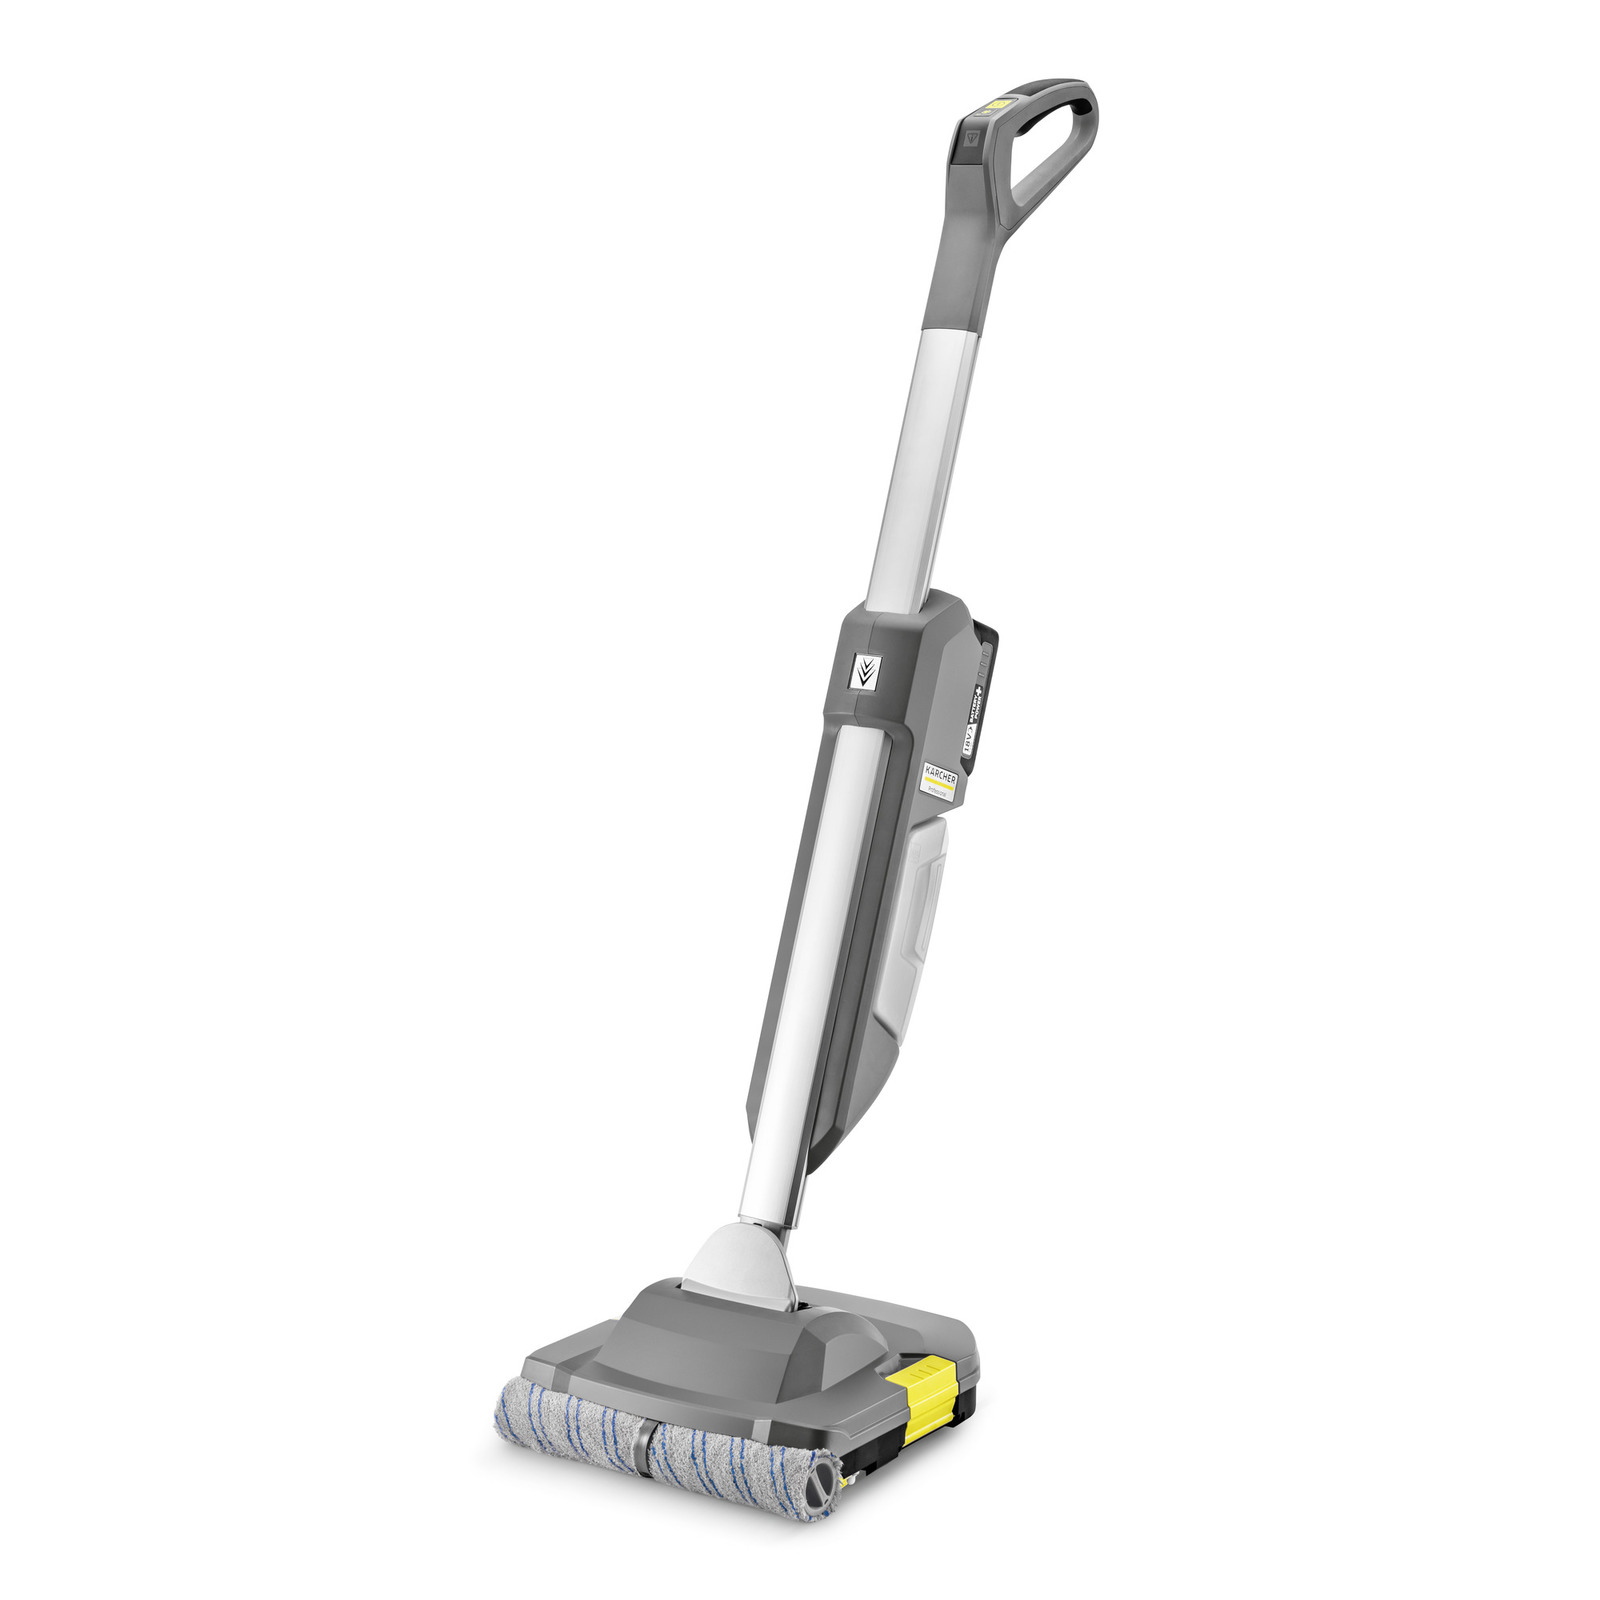 Karcher BR 30/1 C Bp Compact Auto Scrubber karcher, BR, 30/1, auto, scrubber, auto-scrubber, floor, machine commercial, professional, janitorial, walk-behind, easy, effective, clean, cleaner, 